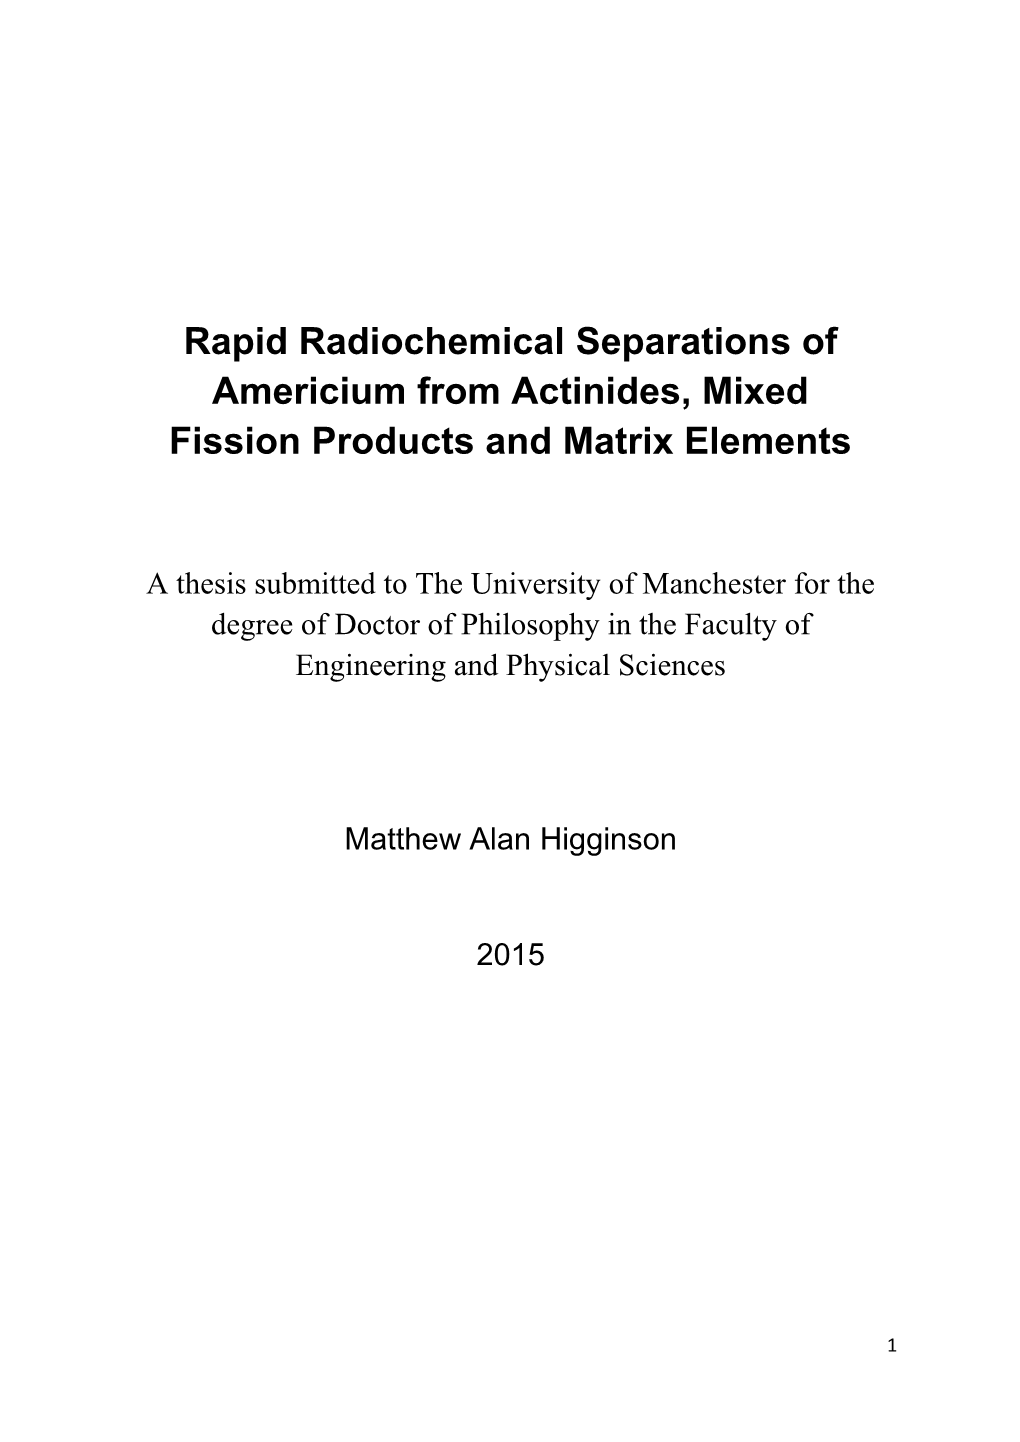 Rapid Radiochemical Separations of Americium from Actinides, Mixed